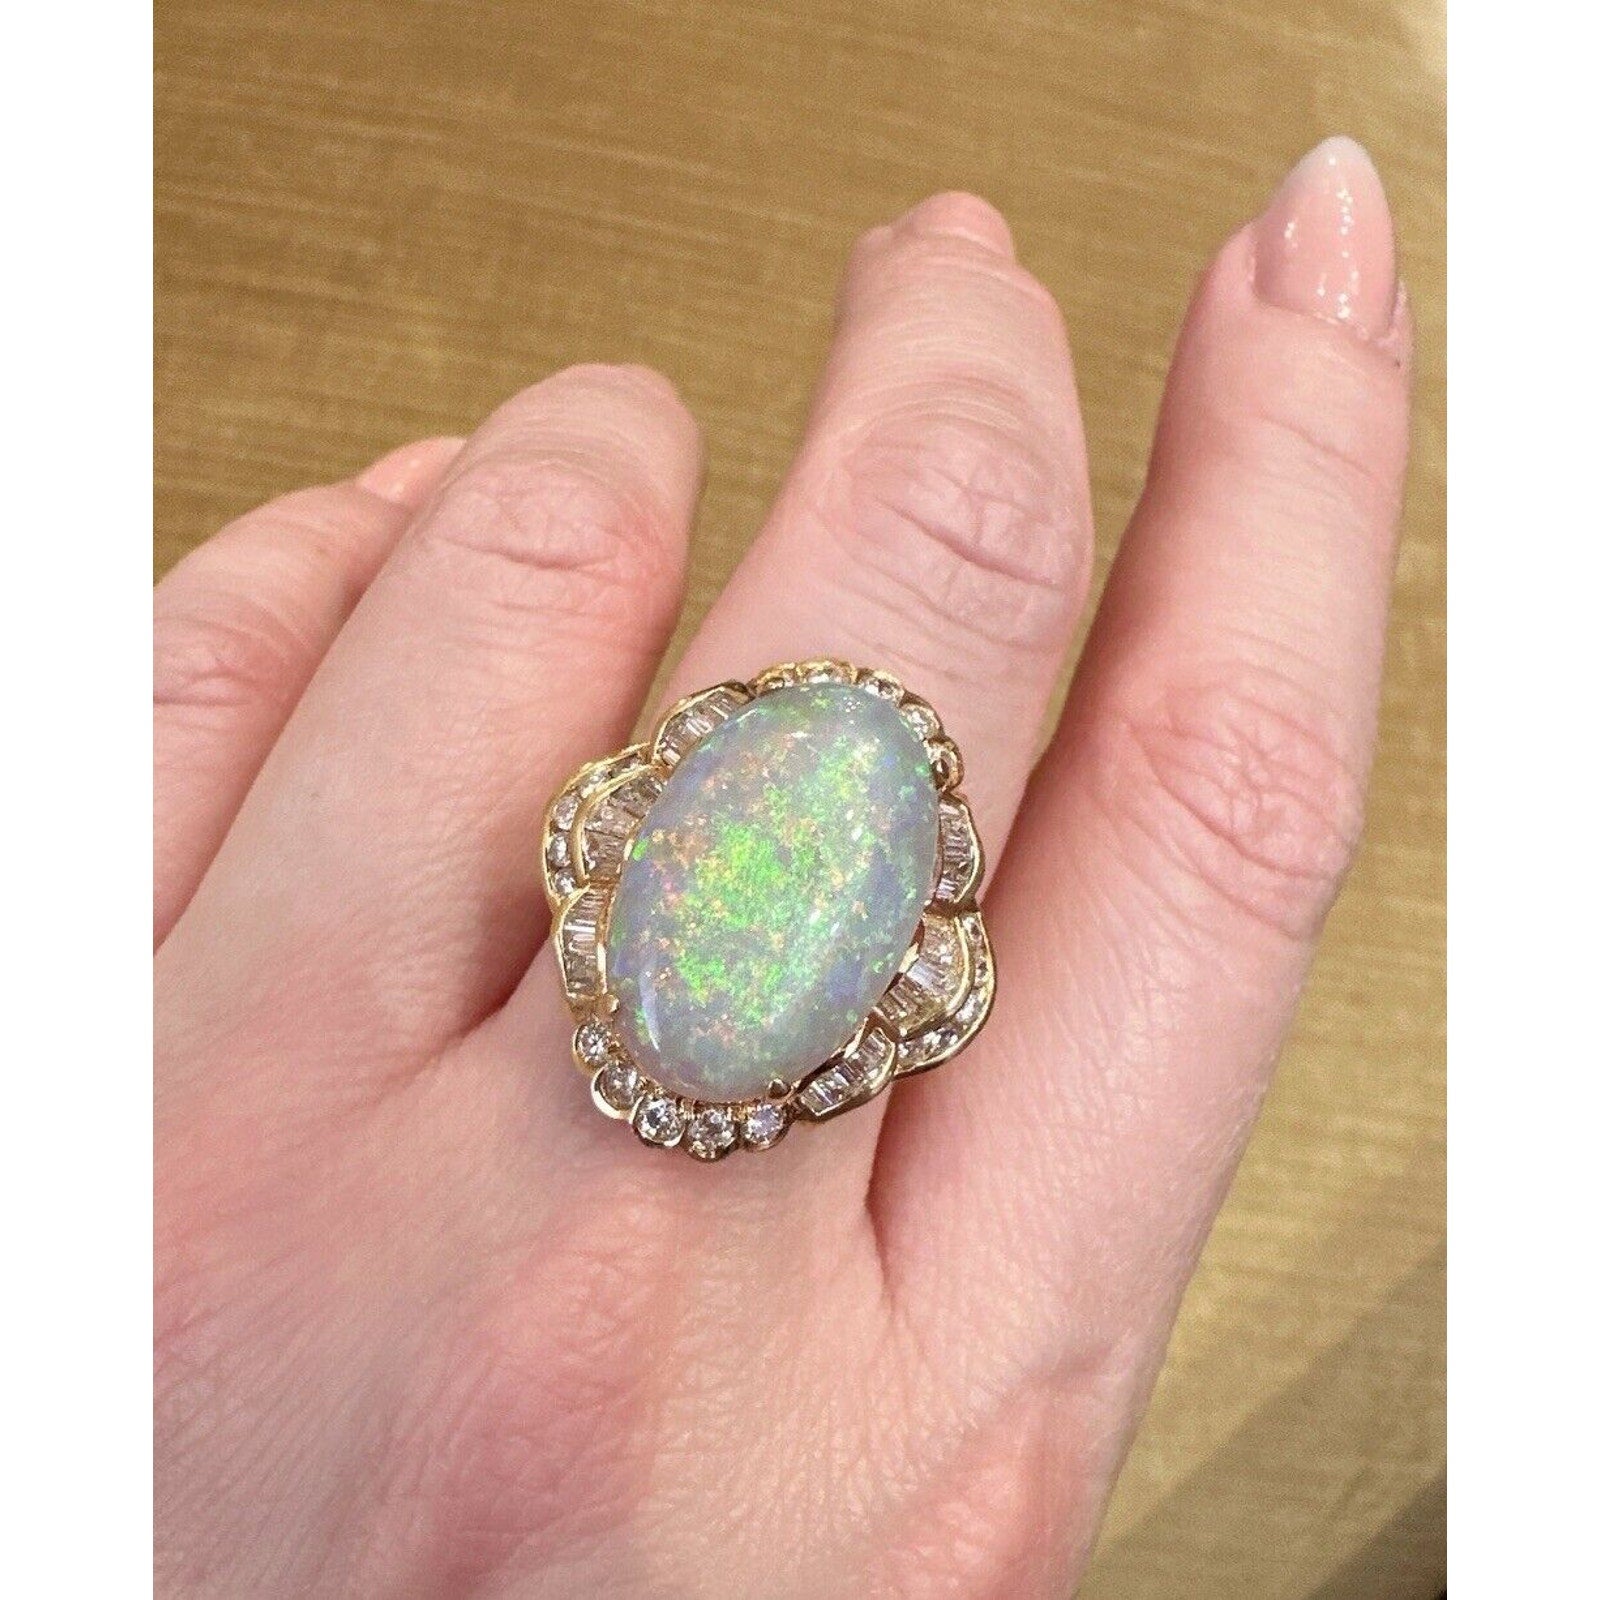 Oval Opal and Diamond Ring 6.53 ct in 18k Yellow Gold - HM2570SA